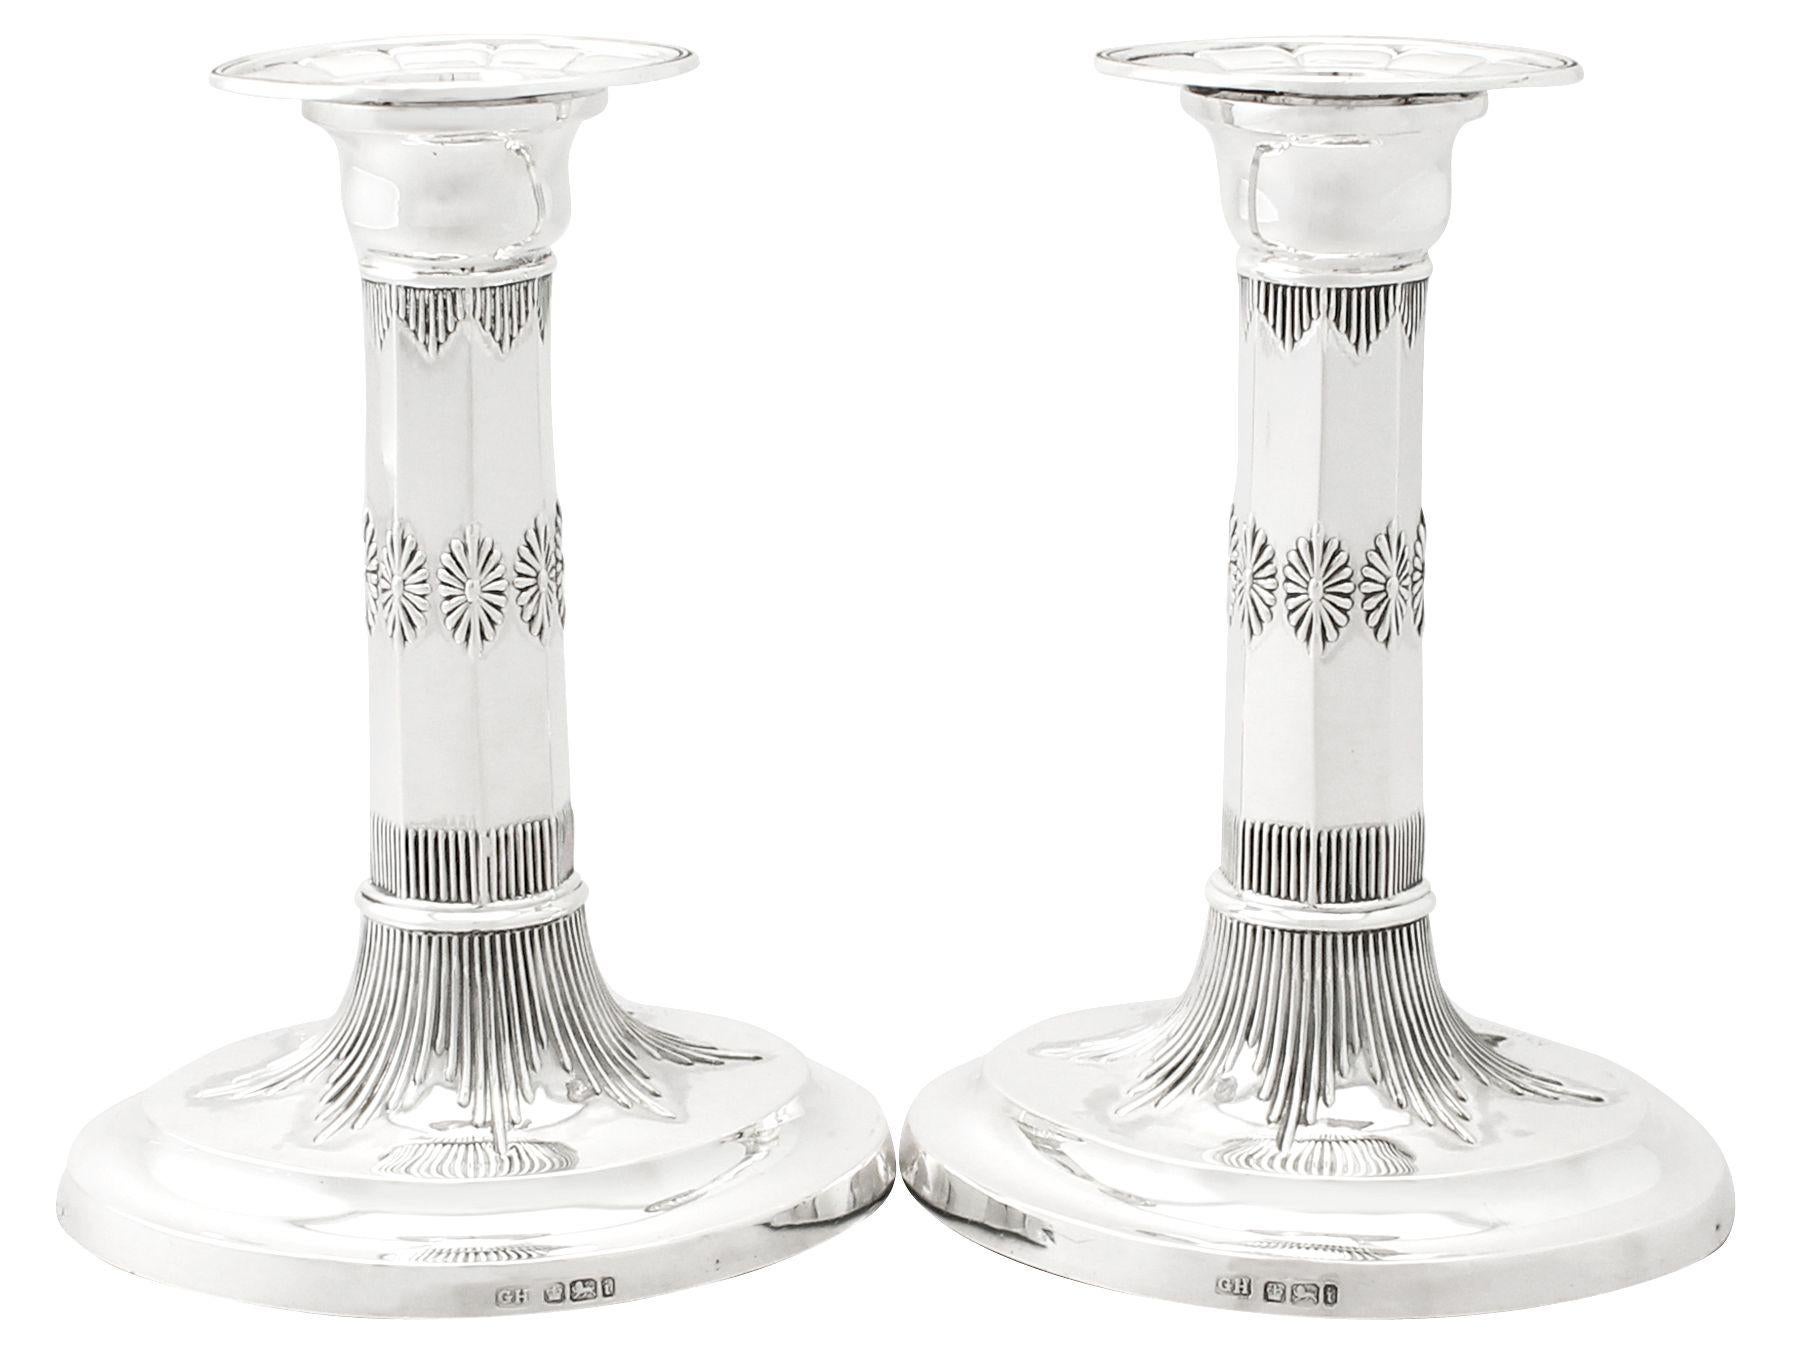 A fine and impressive pair of antique Edwardian English sterling silver candlesticks with sporting interest; an addition to our diverse ornamental silverware collection. 

These fine antique Edwardian sterling silver candlesticks have plain